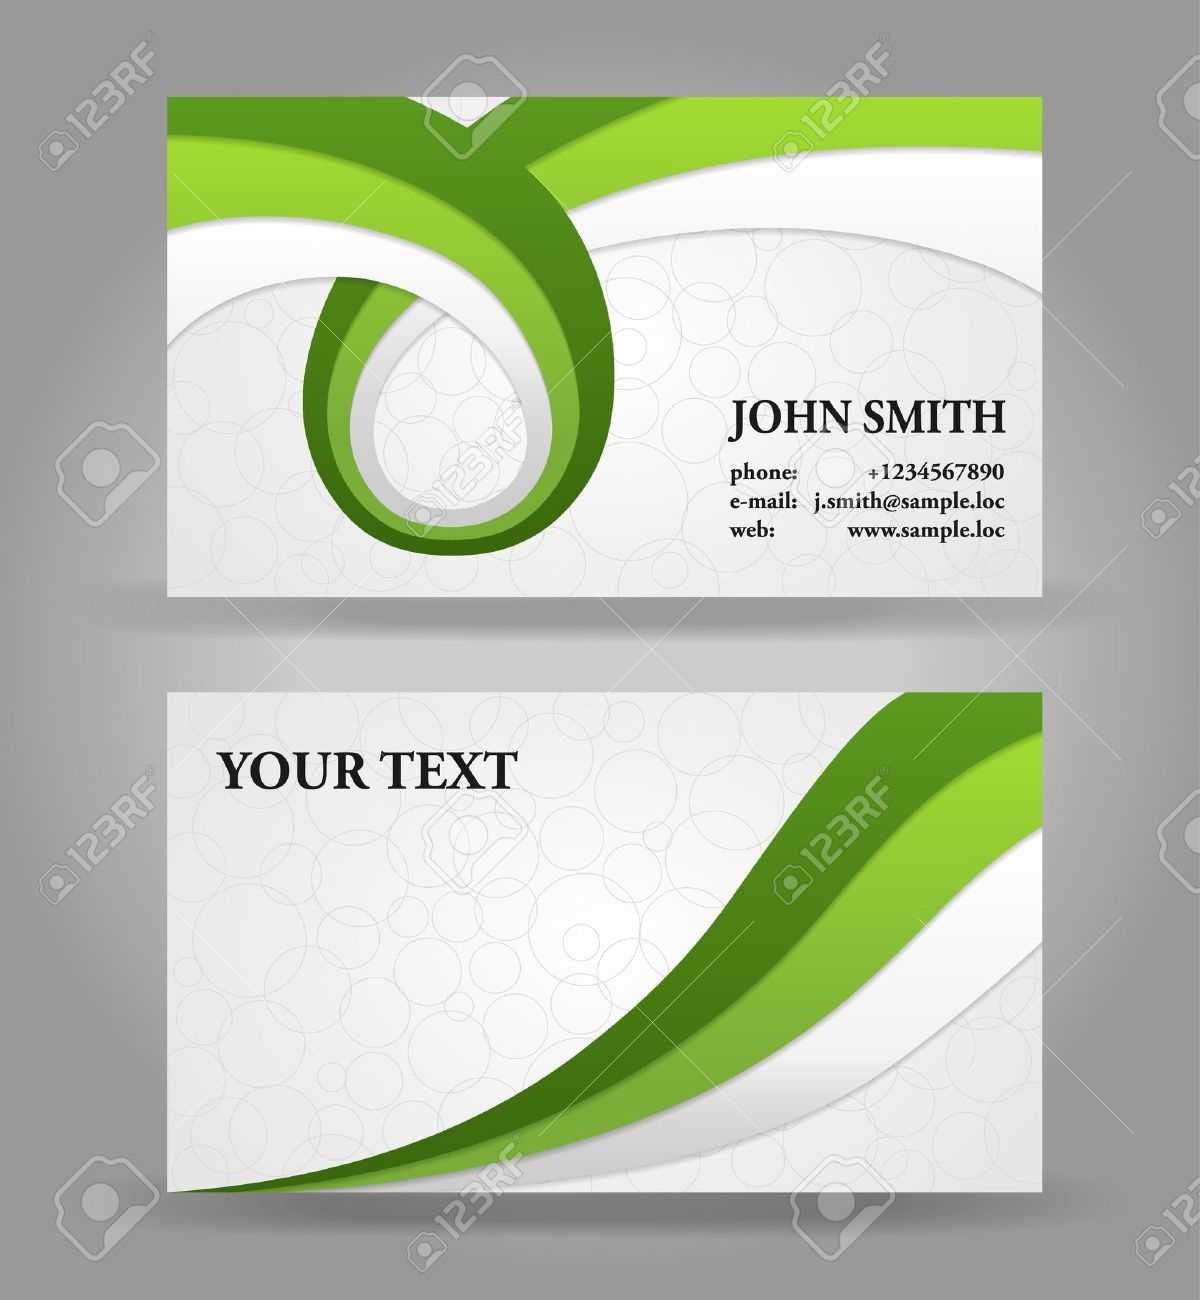 Green And Gray Modern Business Card Template With Ribbons Intended For Template For Calling Card